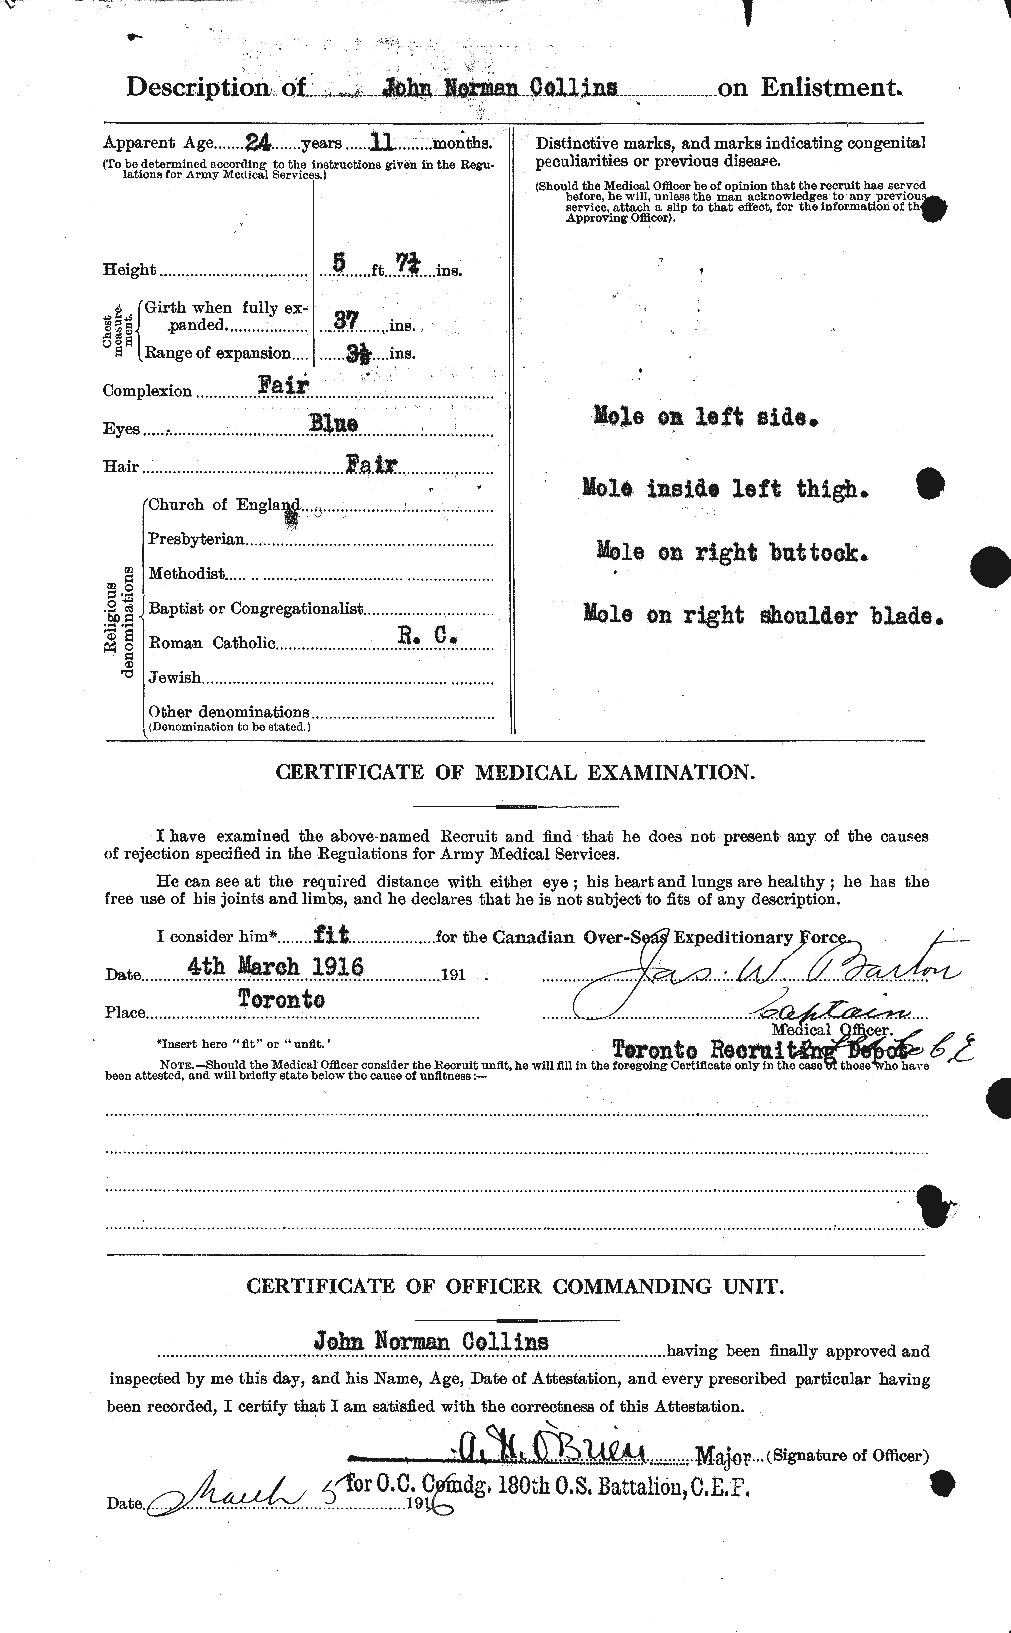 Personnel Records of the First World War - CEF 069540b